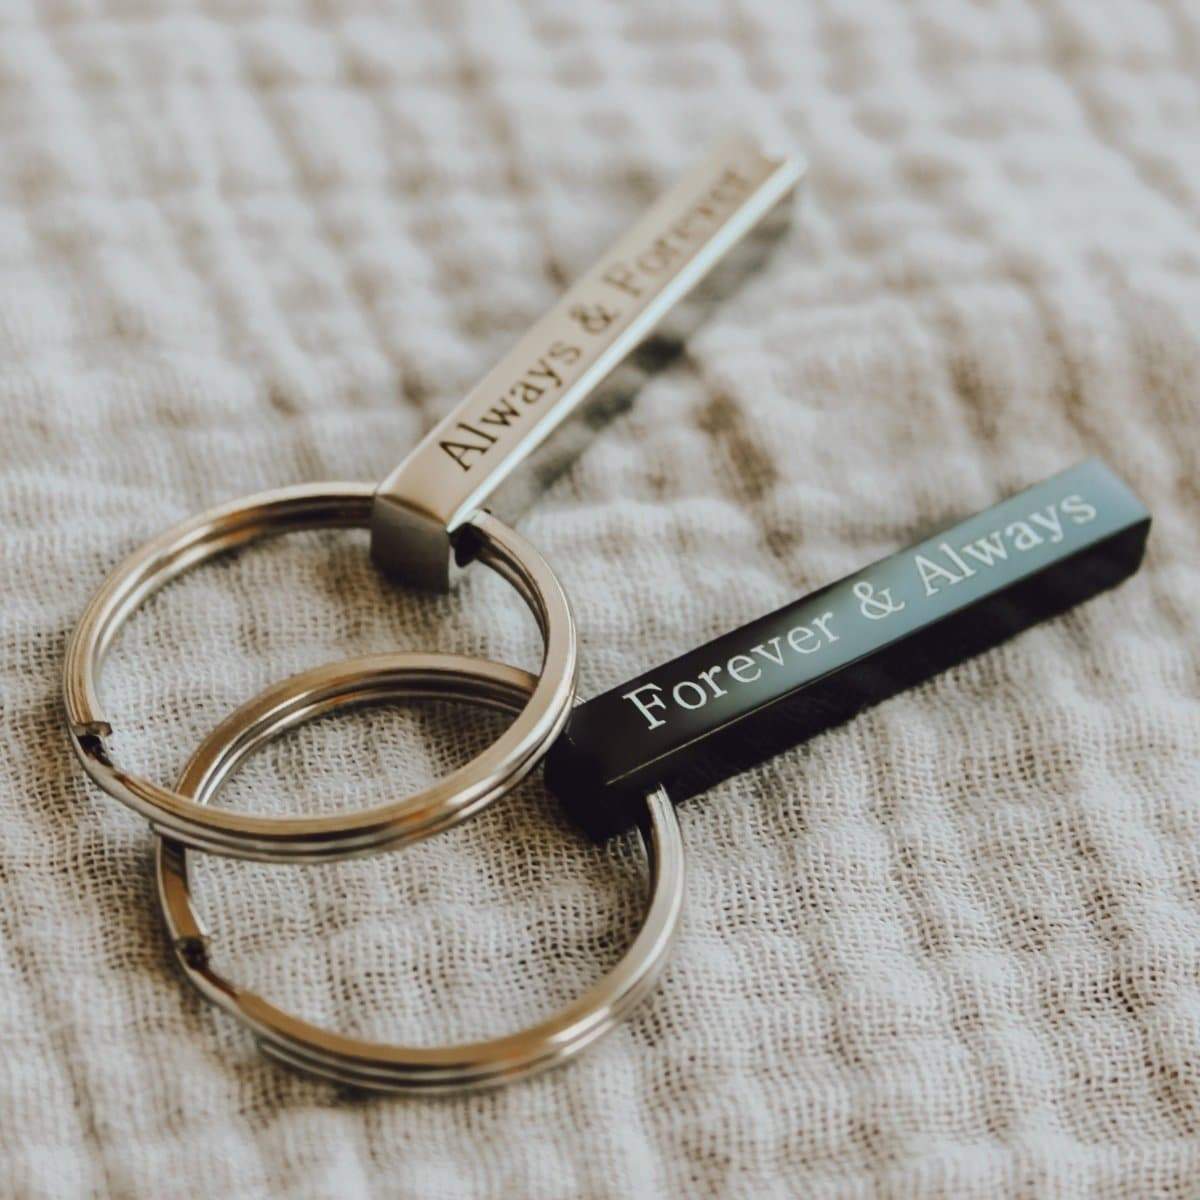 Personalized Stick Keychain with Custom Engraving